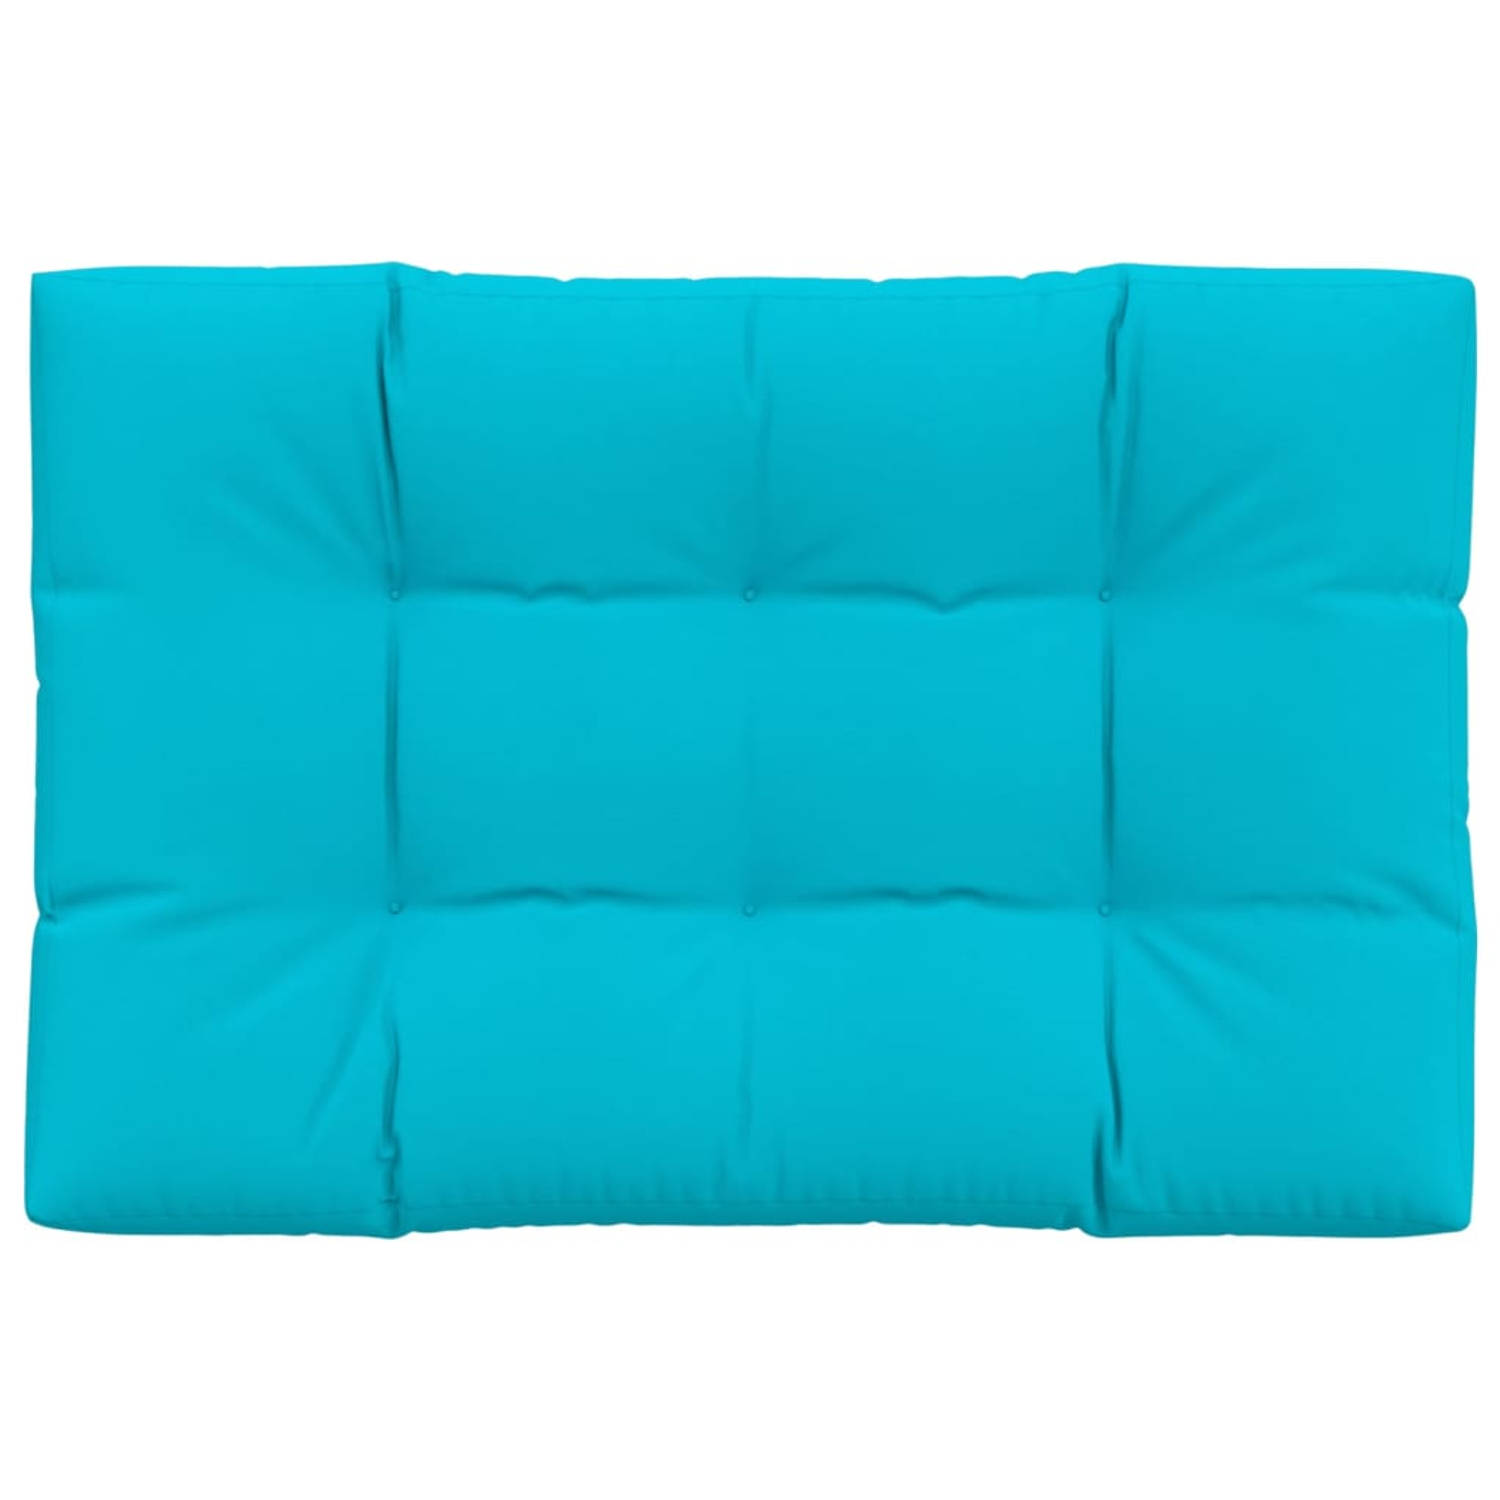 The Living Store Palletkussen - 120 x 80 x 12 cm - Turquoise - Polyester - Waterafstotend